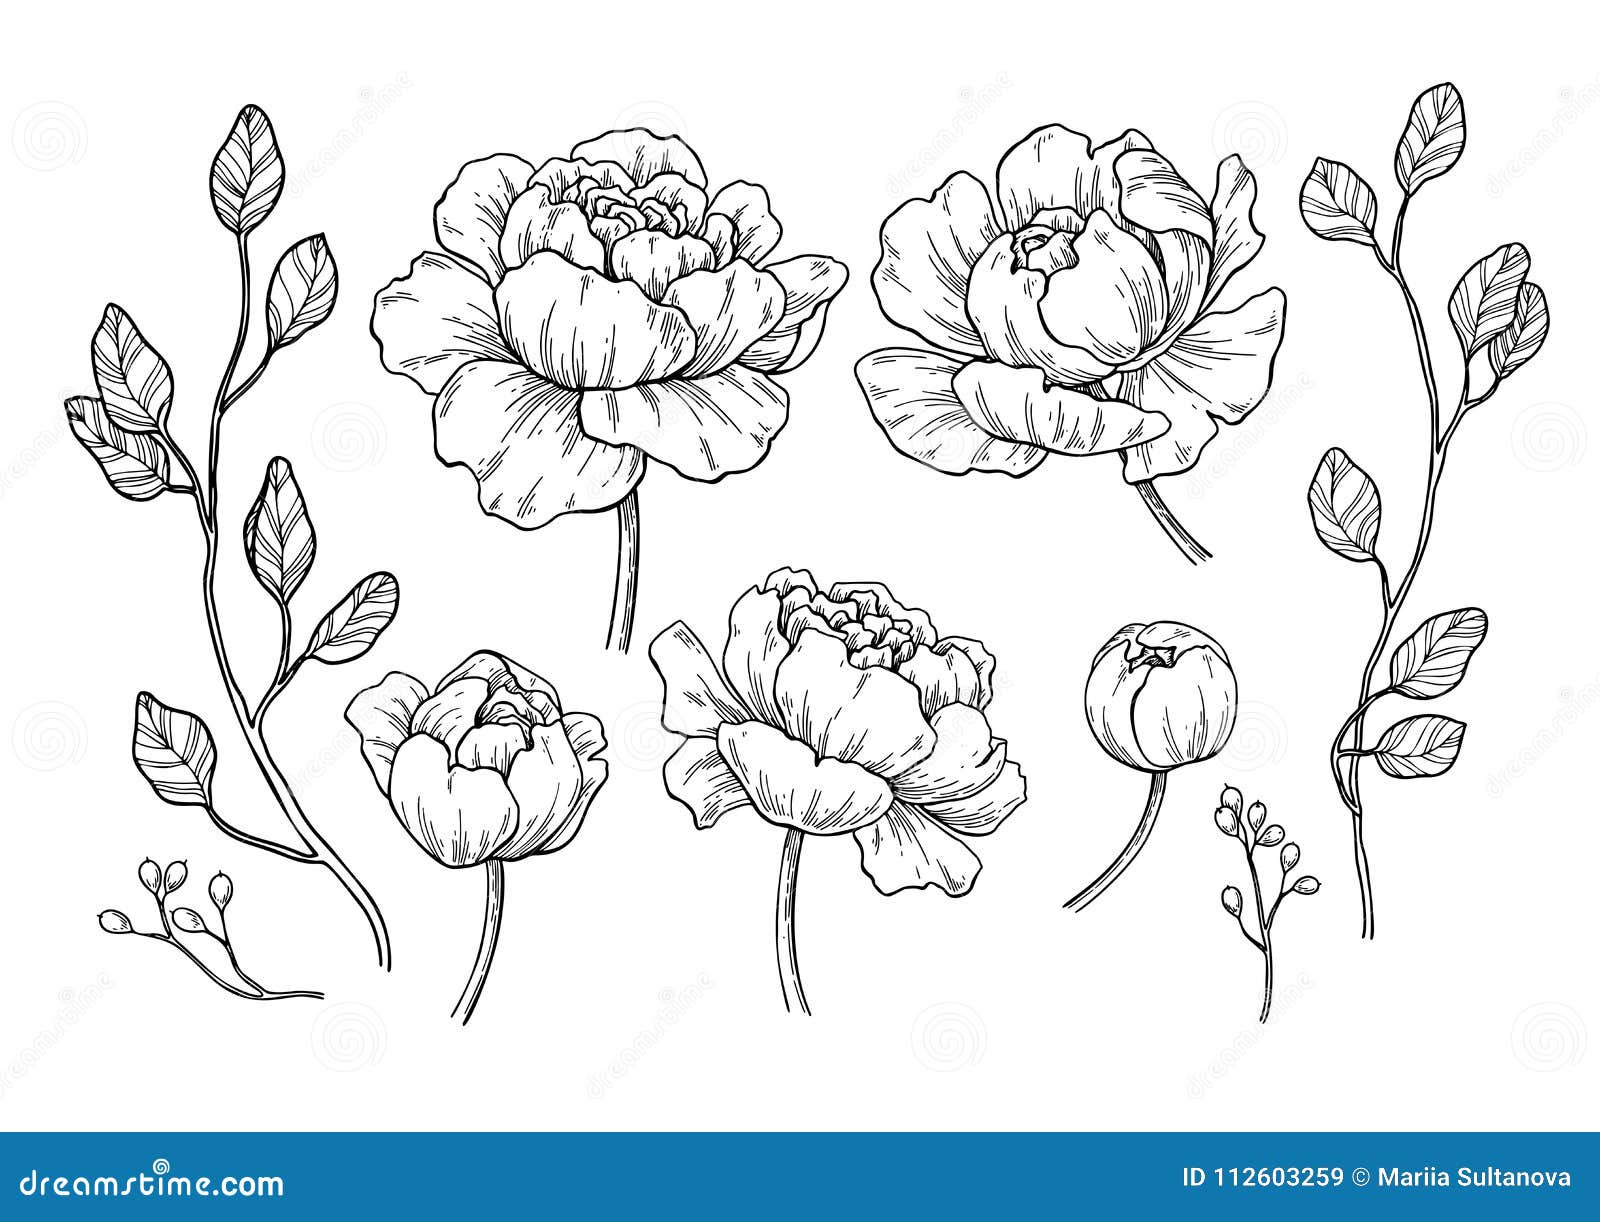 peony flower and leaves drawing.  hand drawn engraved flor